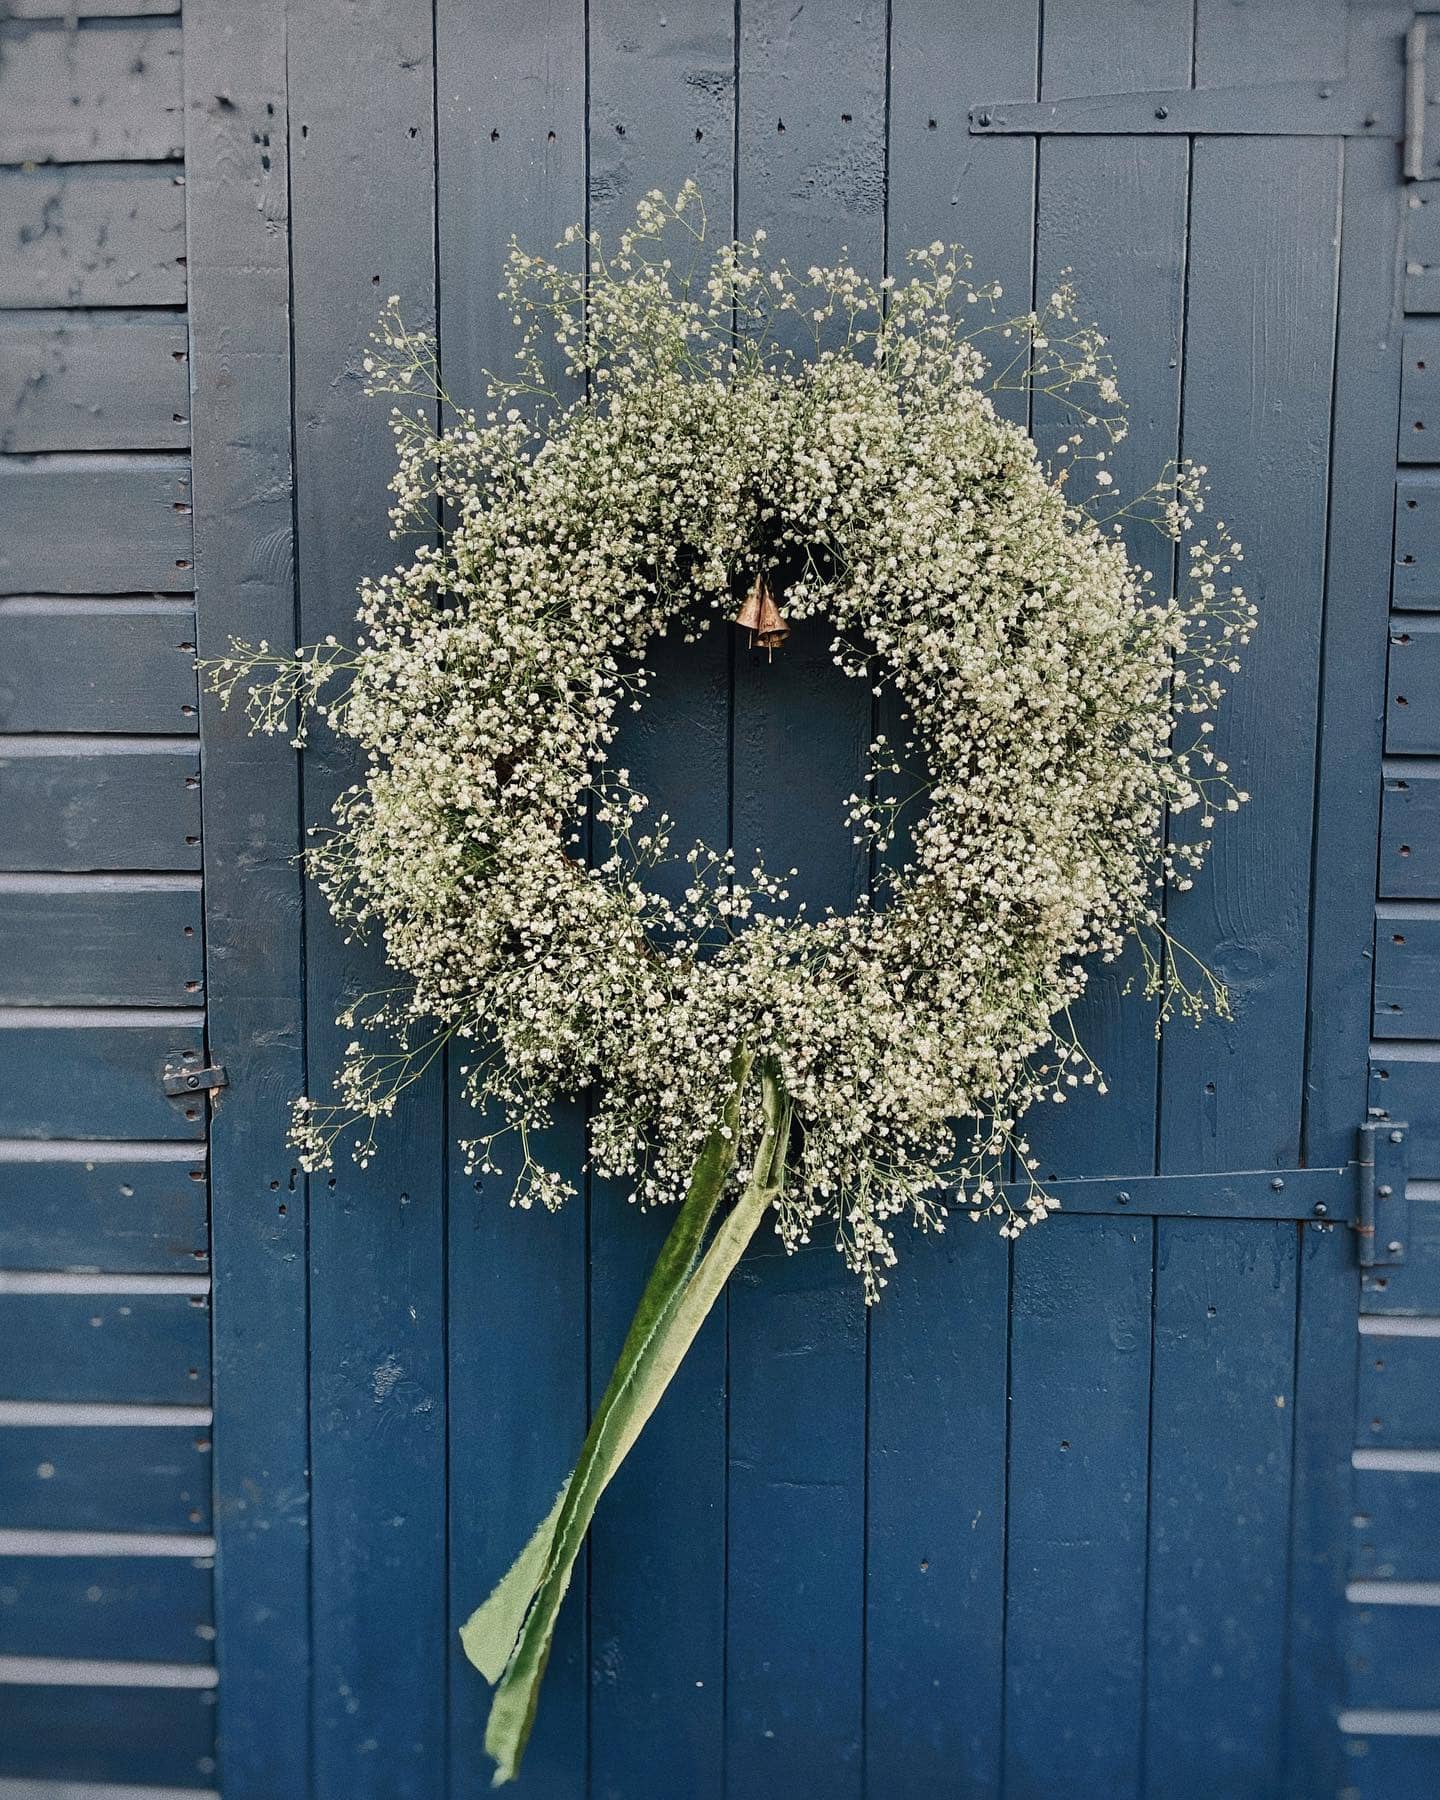 Wreath made of greenery and baby's breath and ribbon against a blue front door